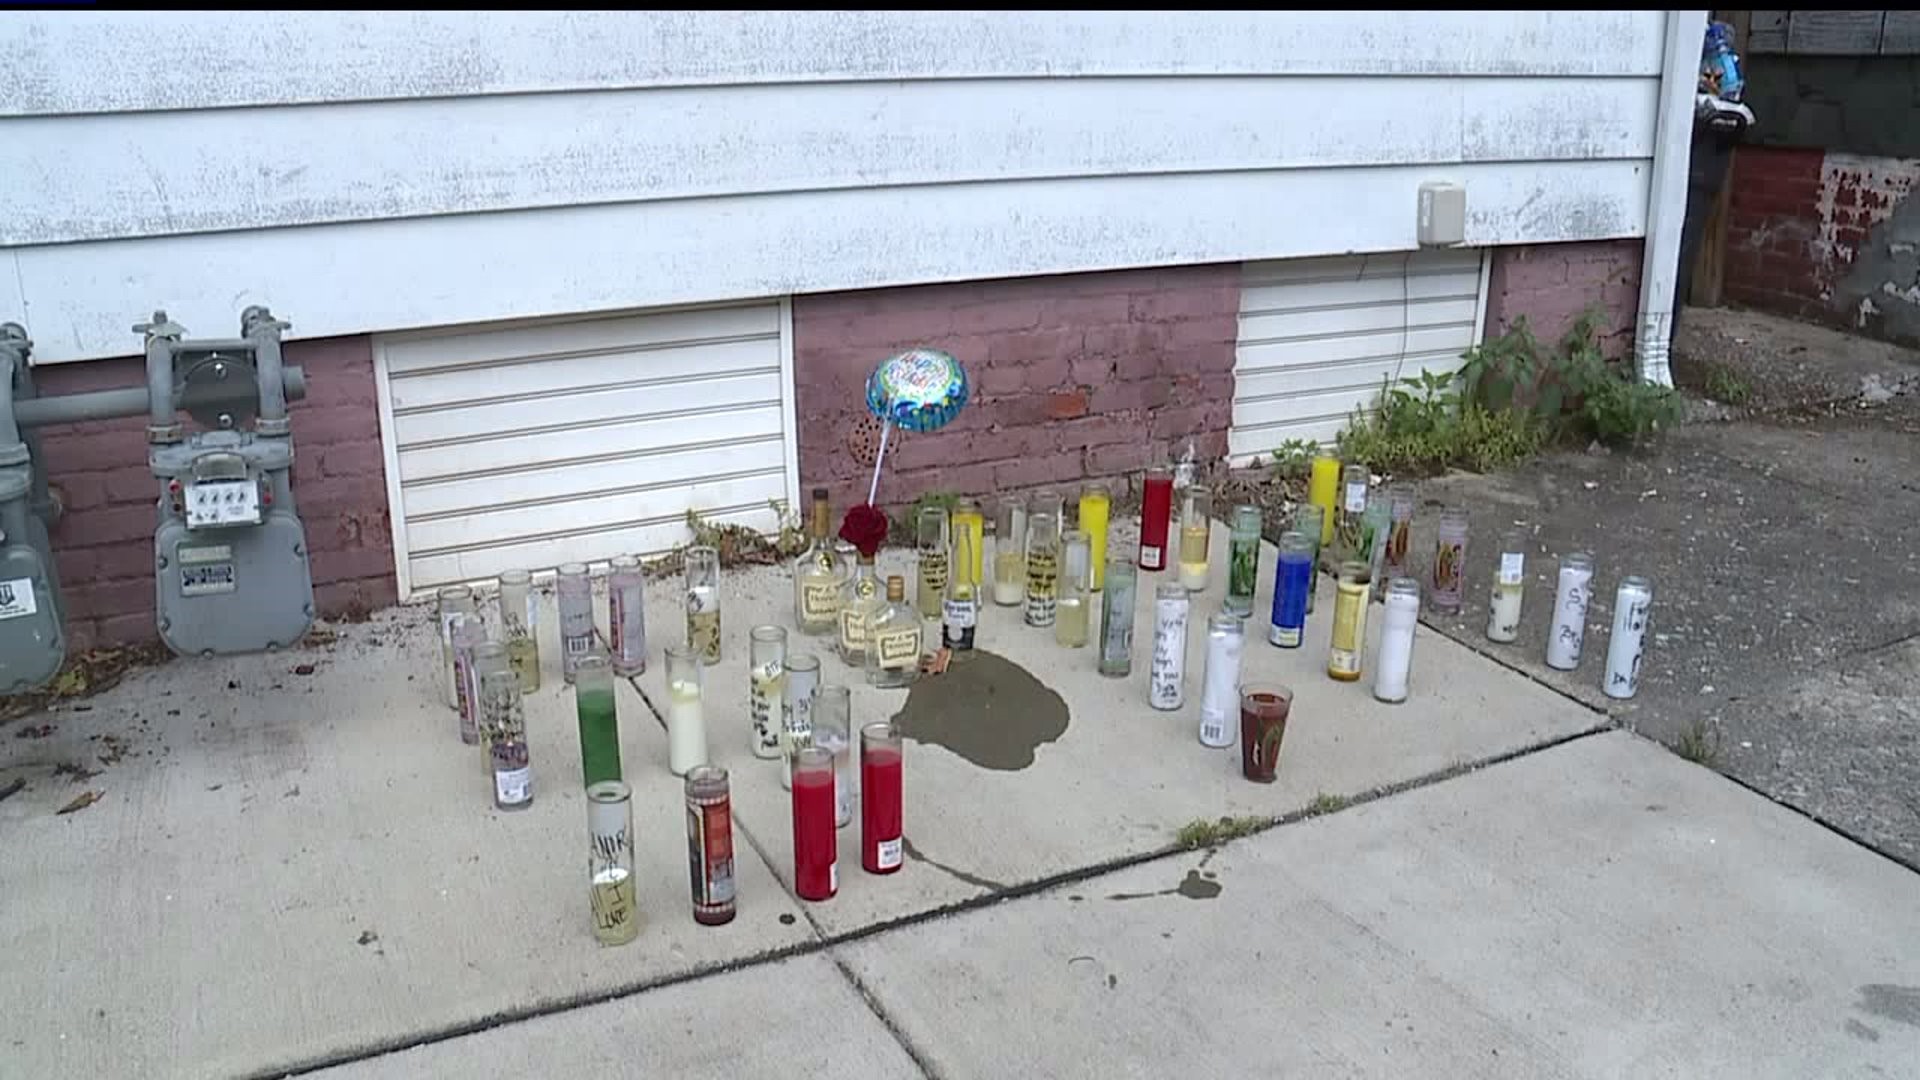 Just hours after celebrating his birthday, man is gunned down in York City